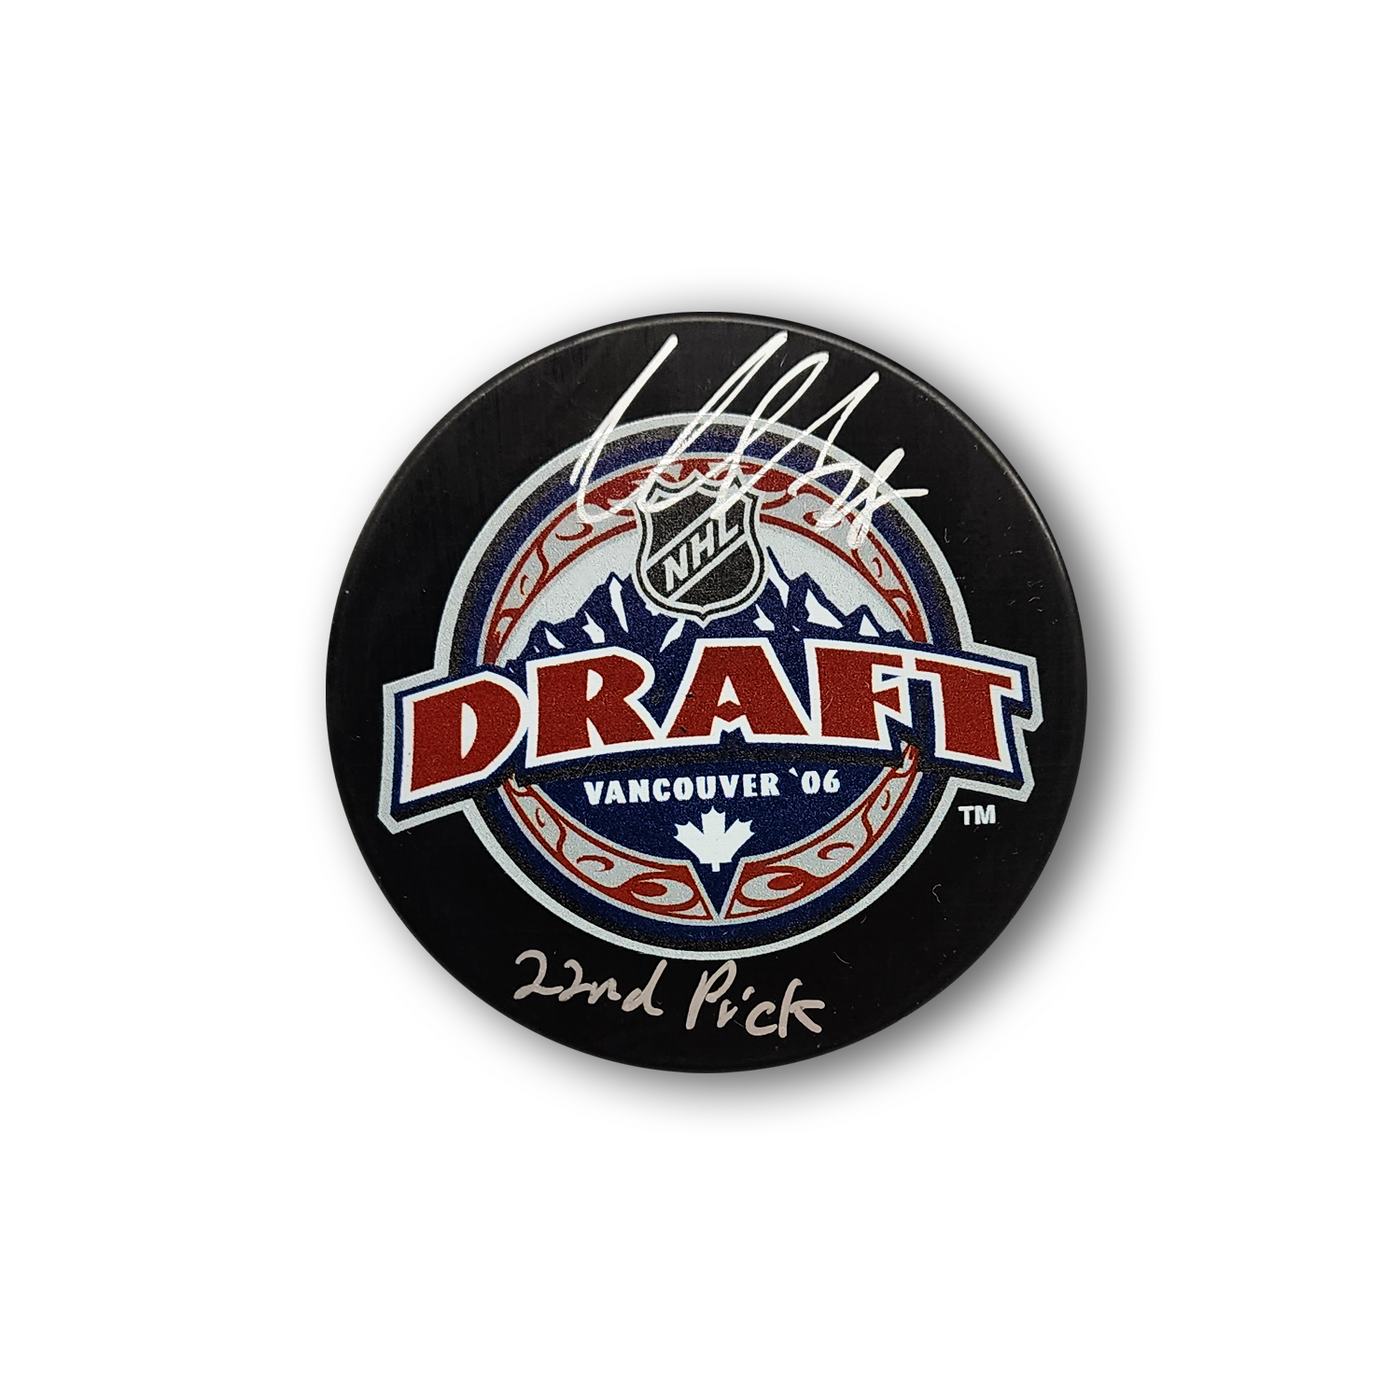 Claude Giroux Autographed 2006 NHL Draft Hockey Puck Inscribed 22nd Pick